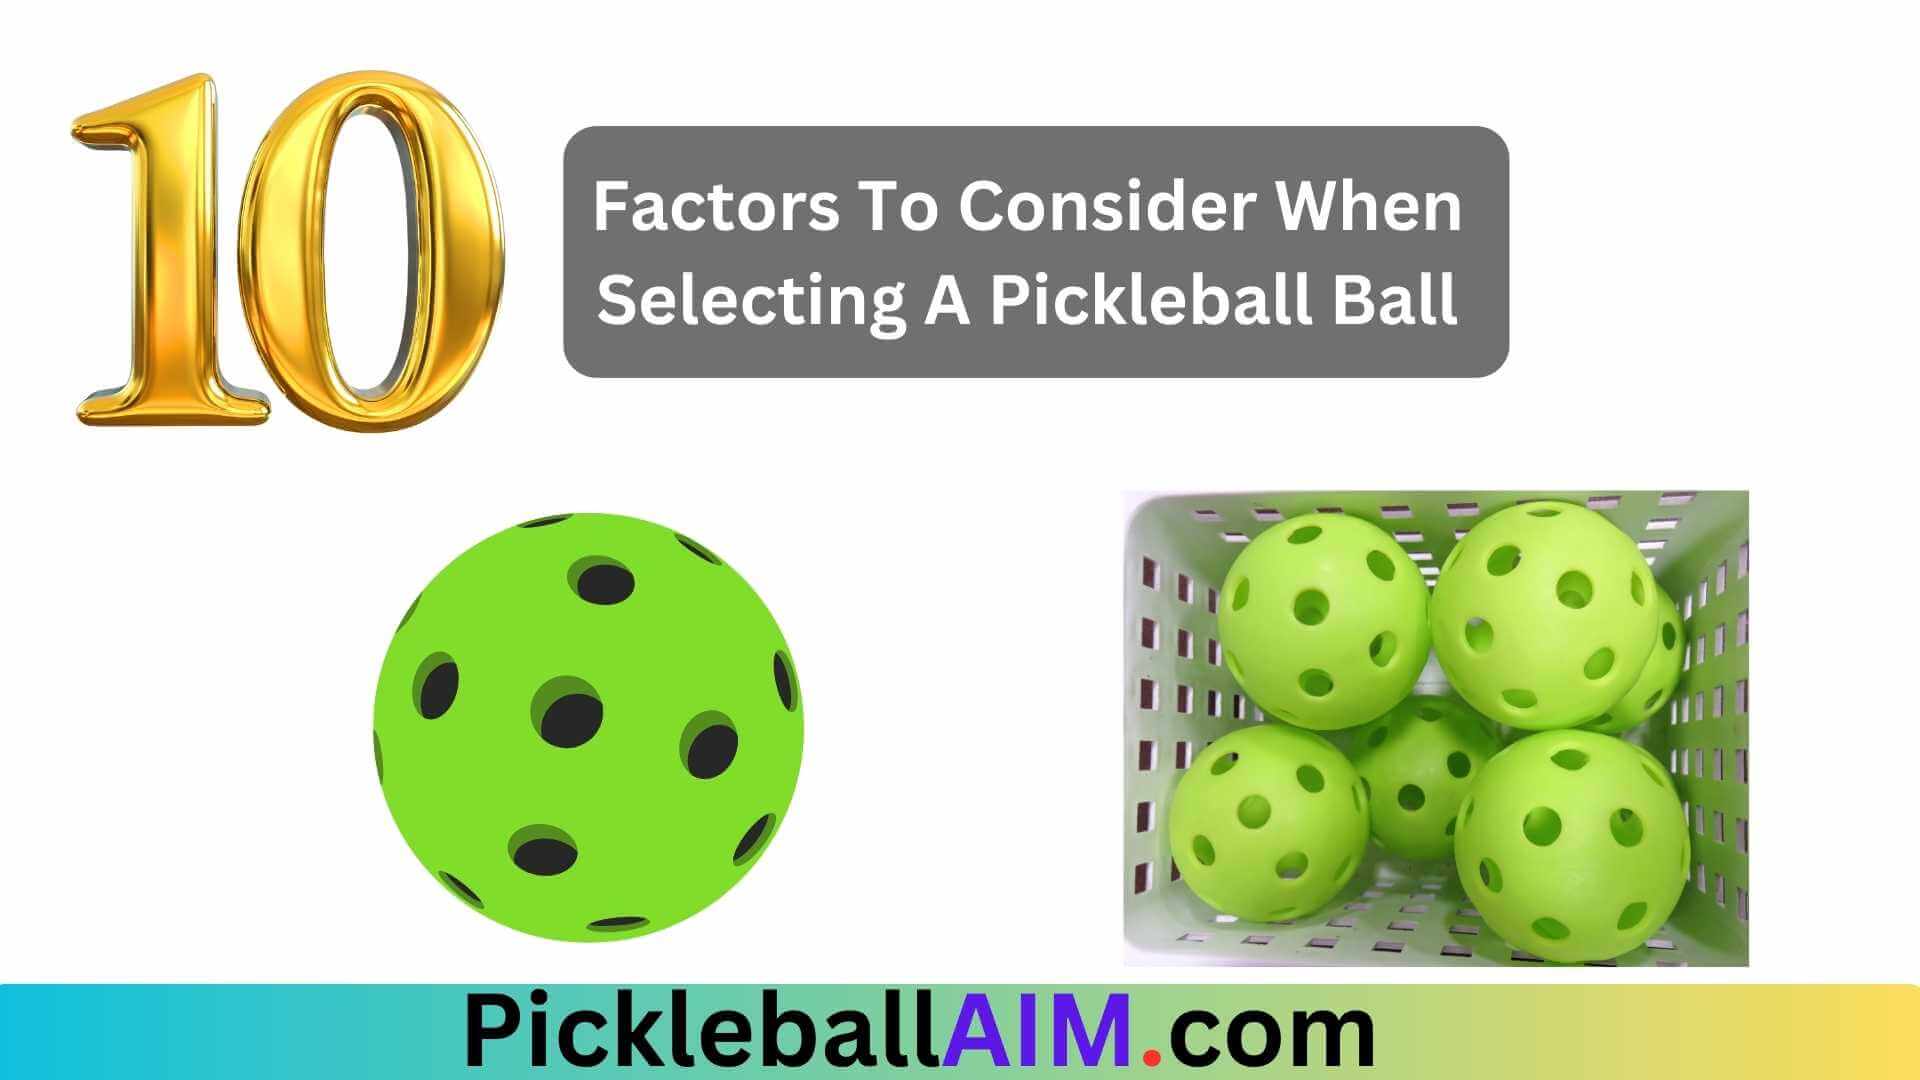 10 Factors To Consider When Selecting A Pickleball Ball